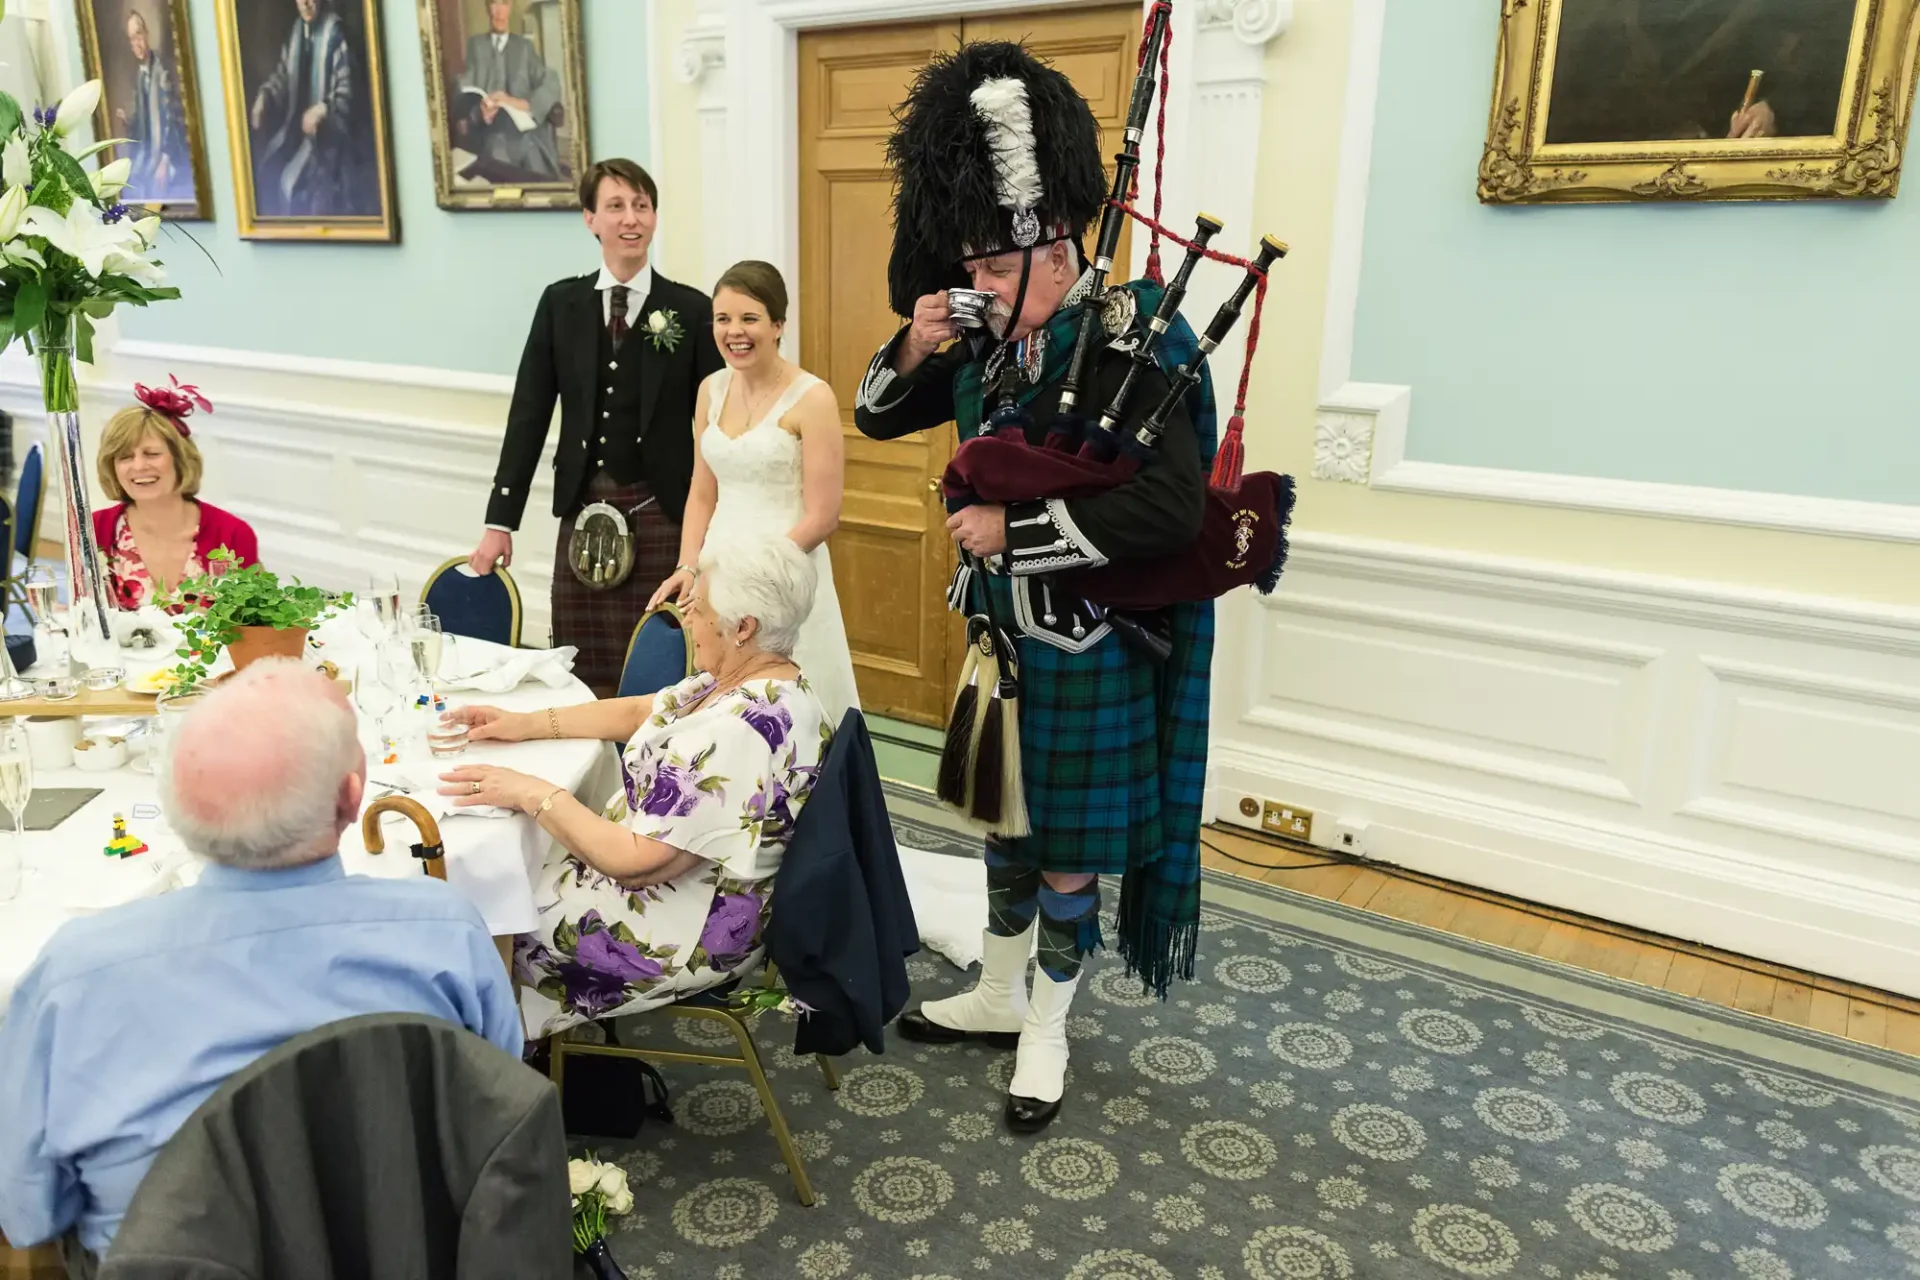 A bagpiper in traditional scottish attire plays at a wedding reception in an elegant room while a bride, groom, and guests watch and smile.